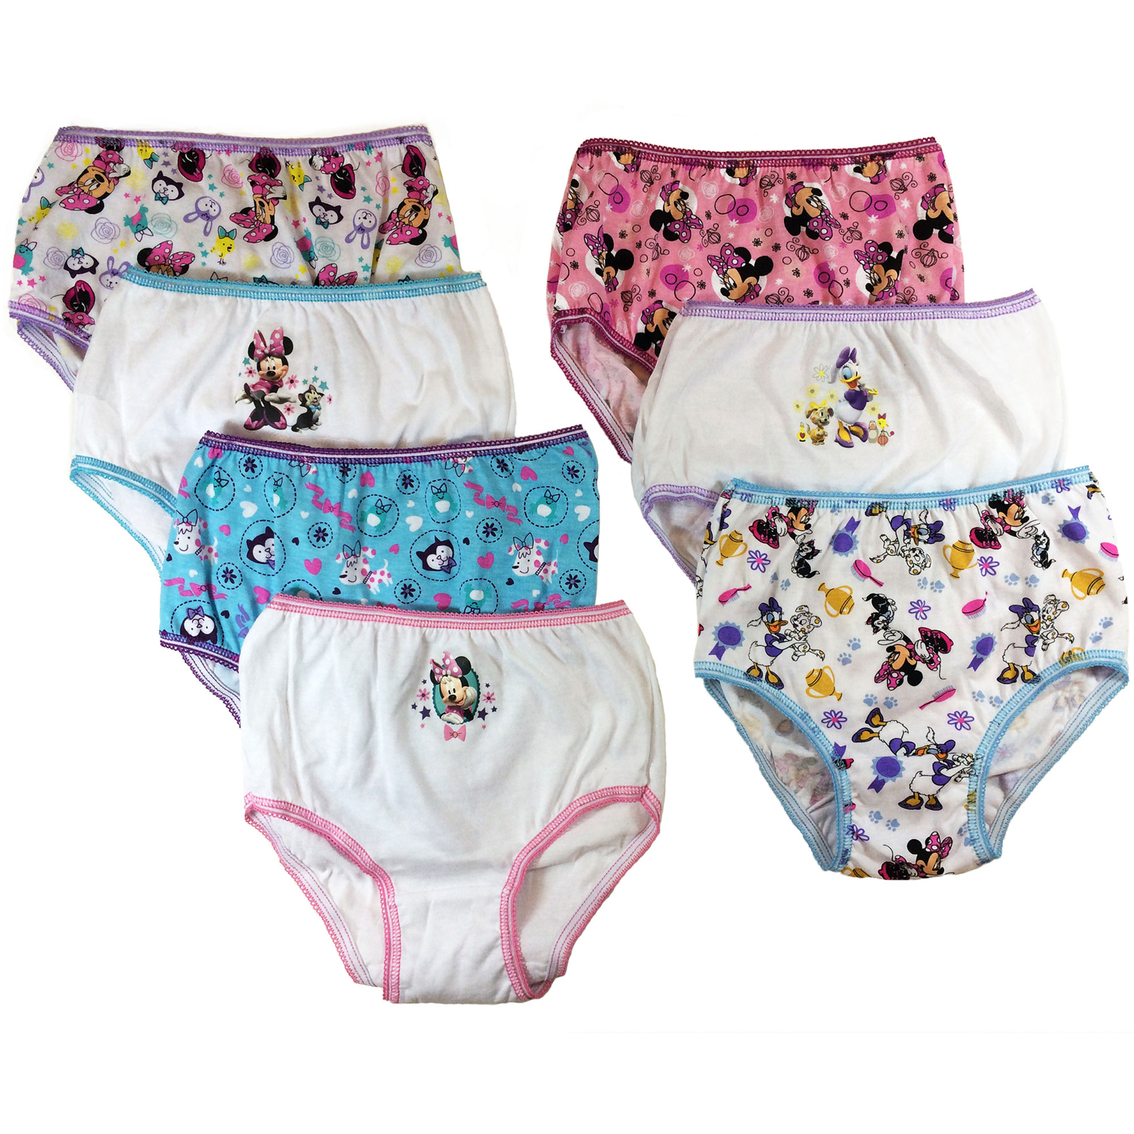 Toddler Girls' 7pk Minnie Mouse Briefs By Handcraft 4T